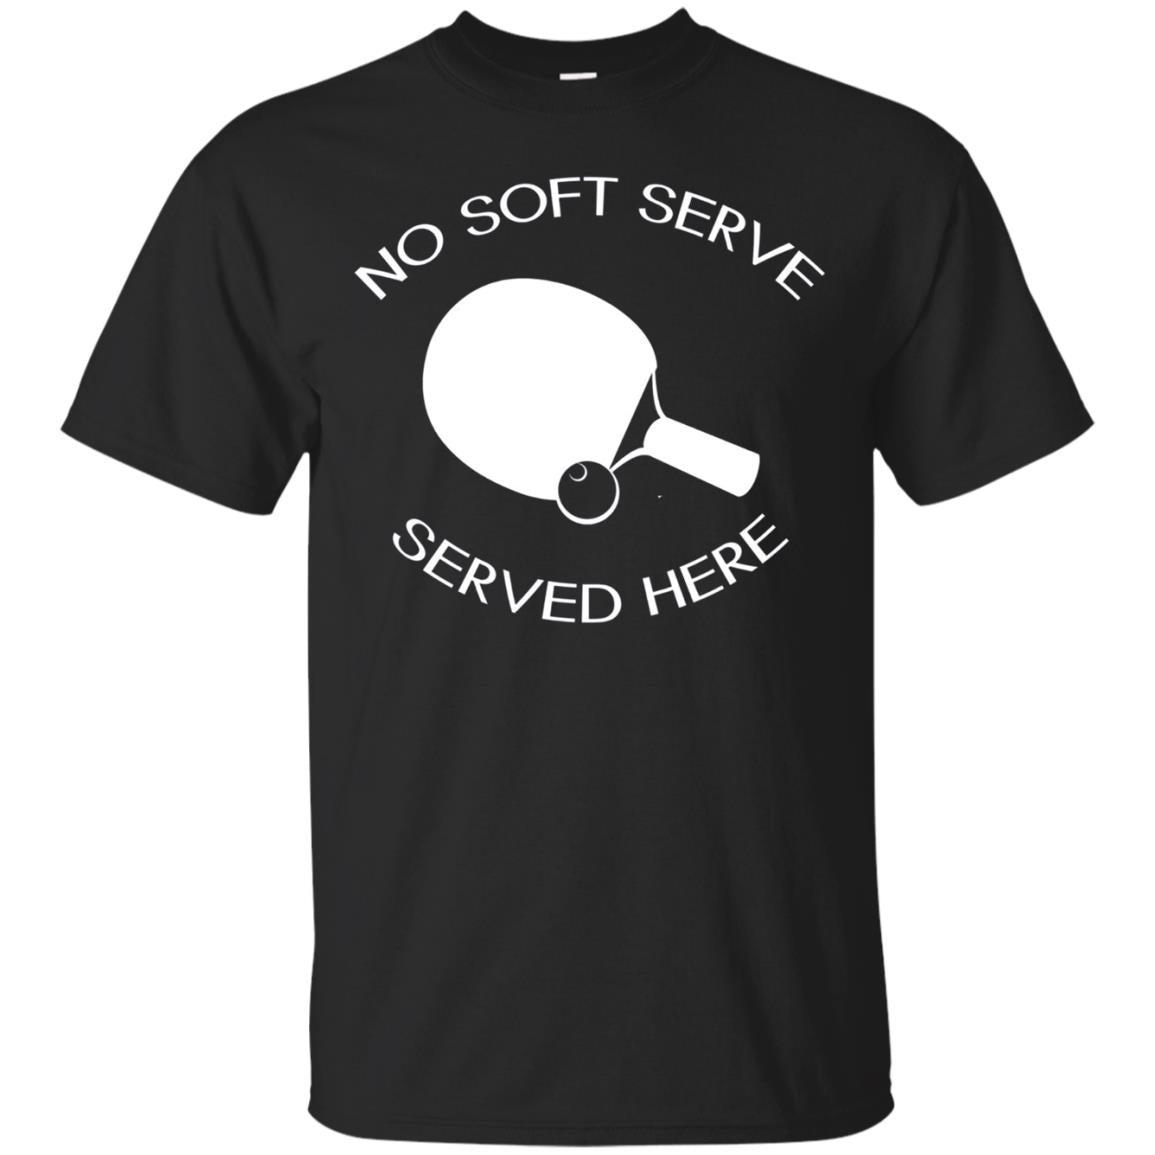 No Soft Serve Served Here Table Tennis T-shirt